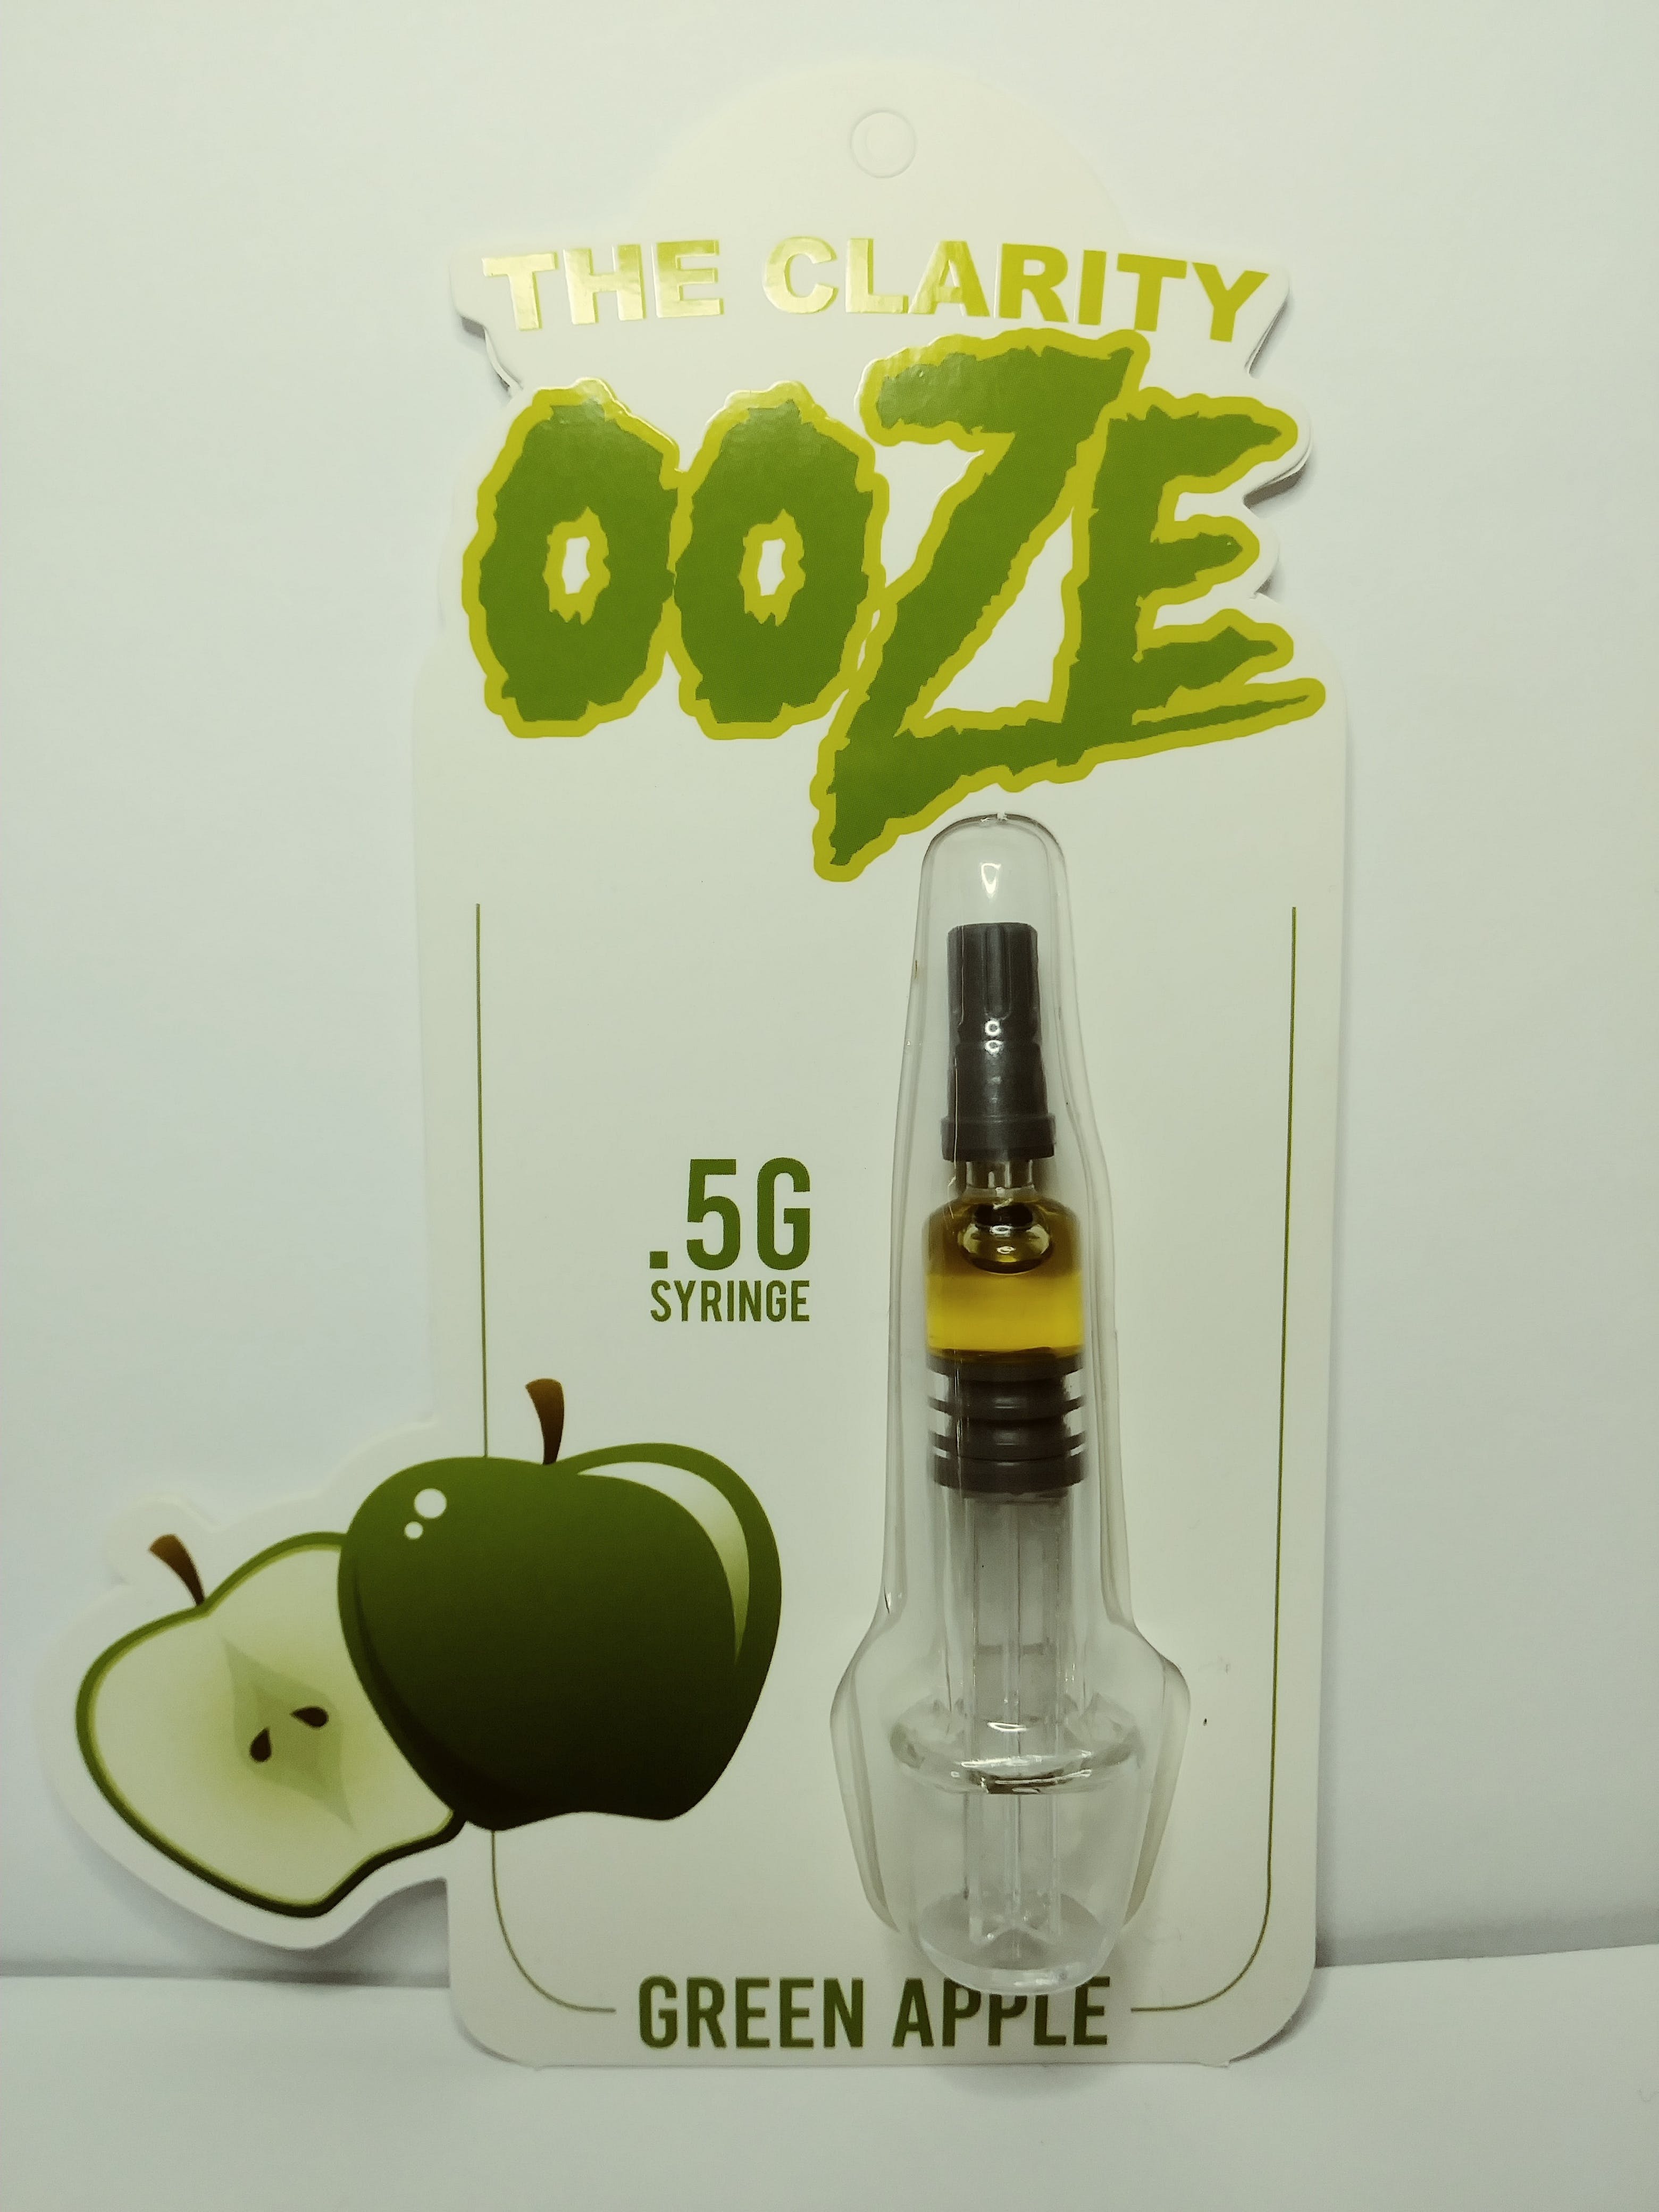 concentrate-the-clarity-ooze-green-apple